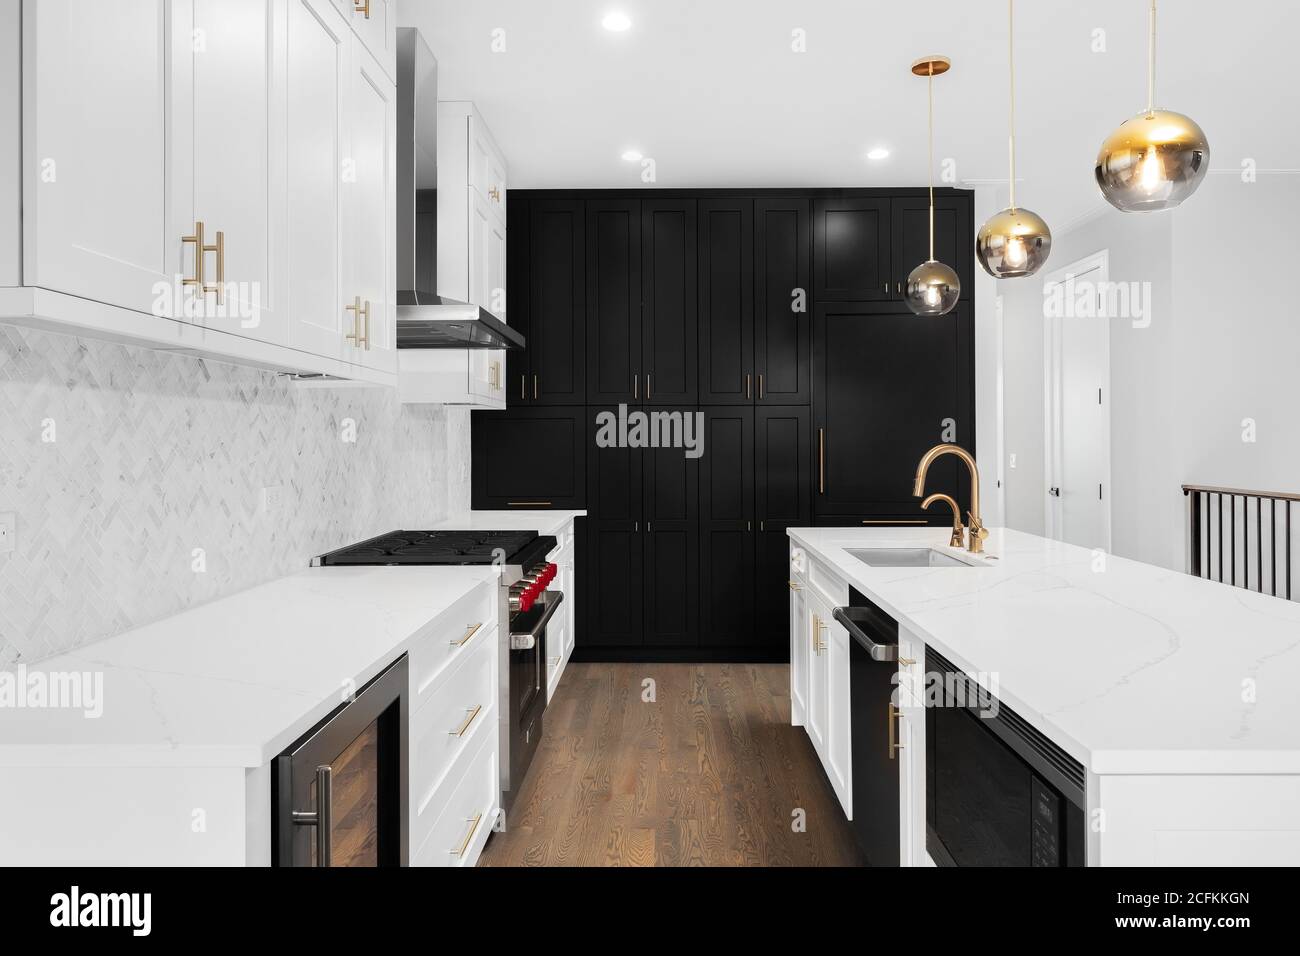 A Luxurious Modern Kitchen With White And Black Cabinets Gold Hardware Faucets And White Herringbone Marble Tiles Stock Photo Alamy